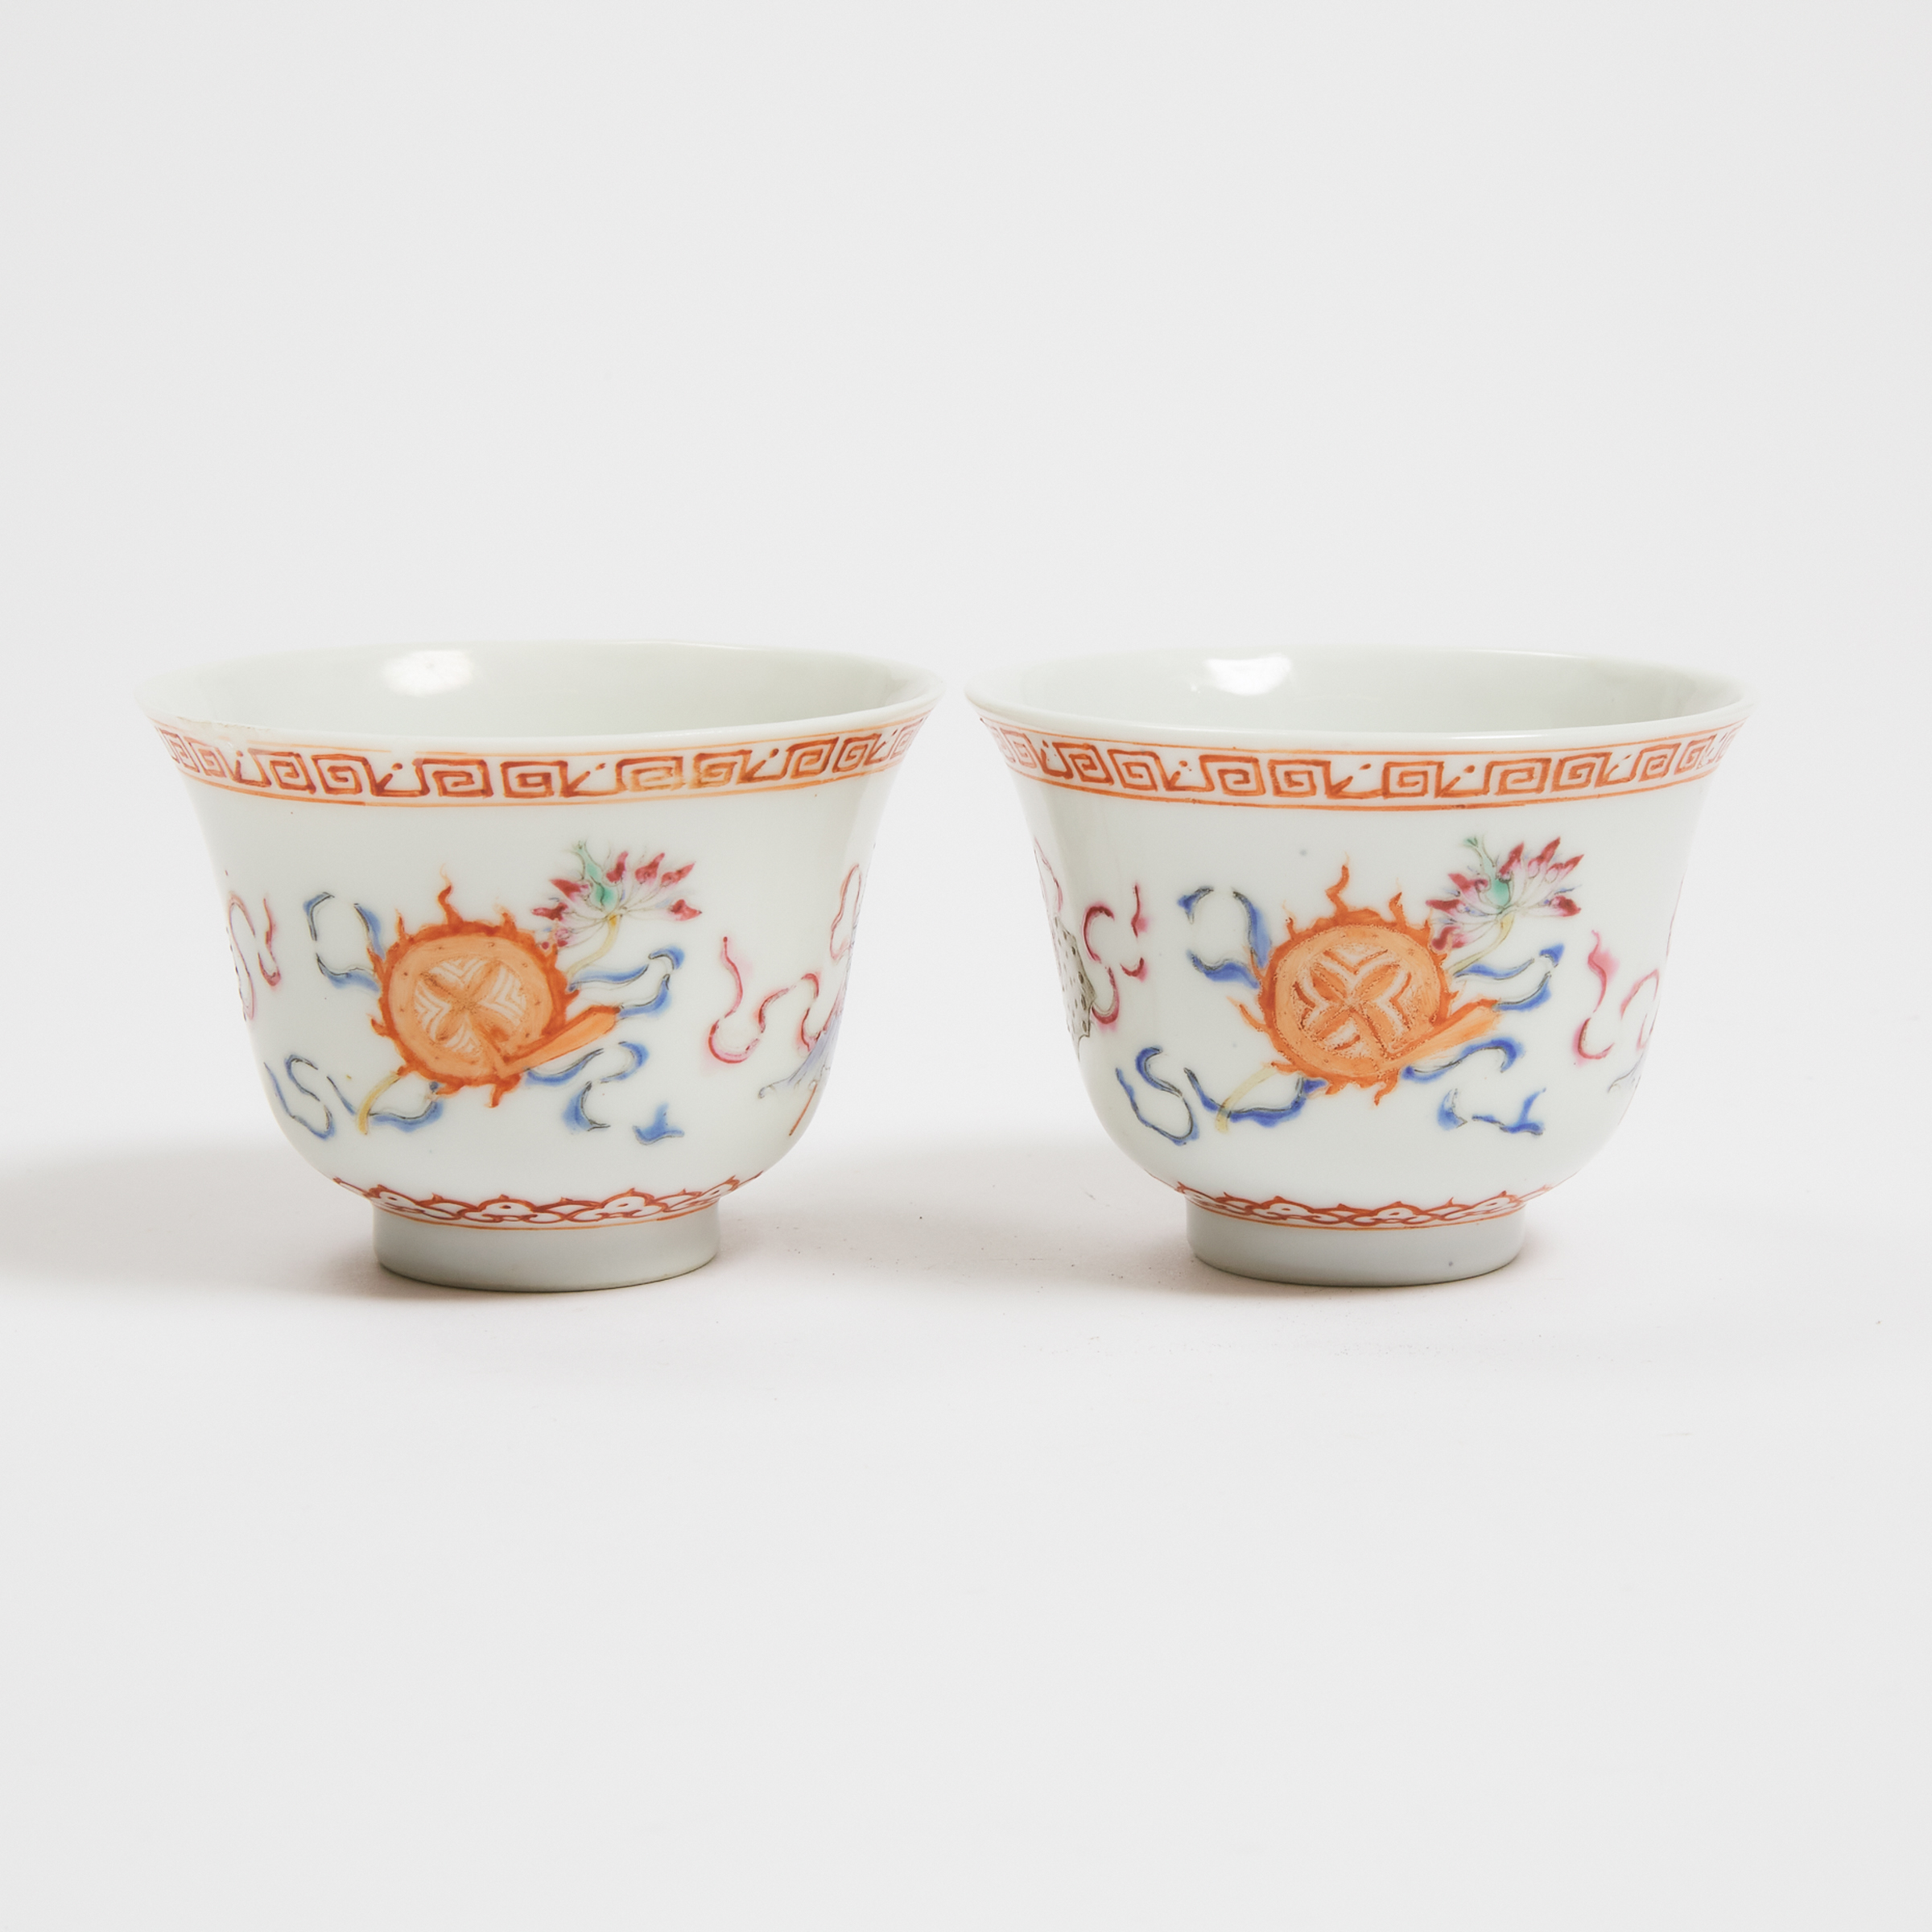 A Pair of Famille Rose 'Buddhist Emblems' Wine Cups, Qianlong Mark, Late Qing Dynasty